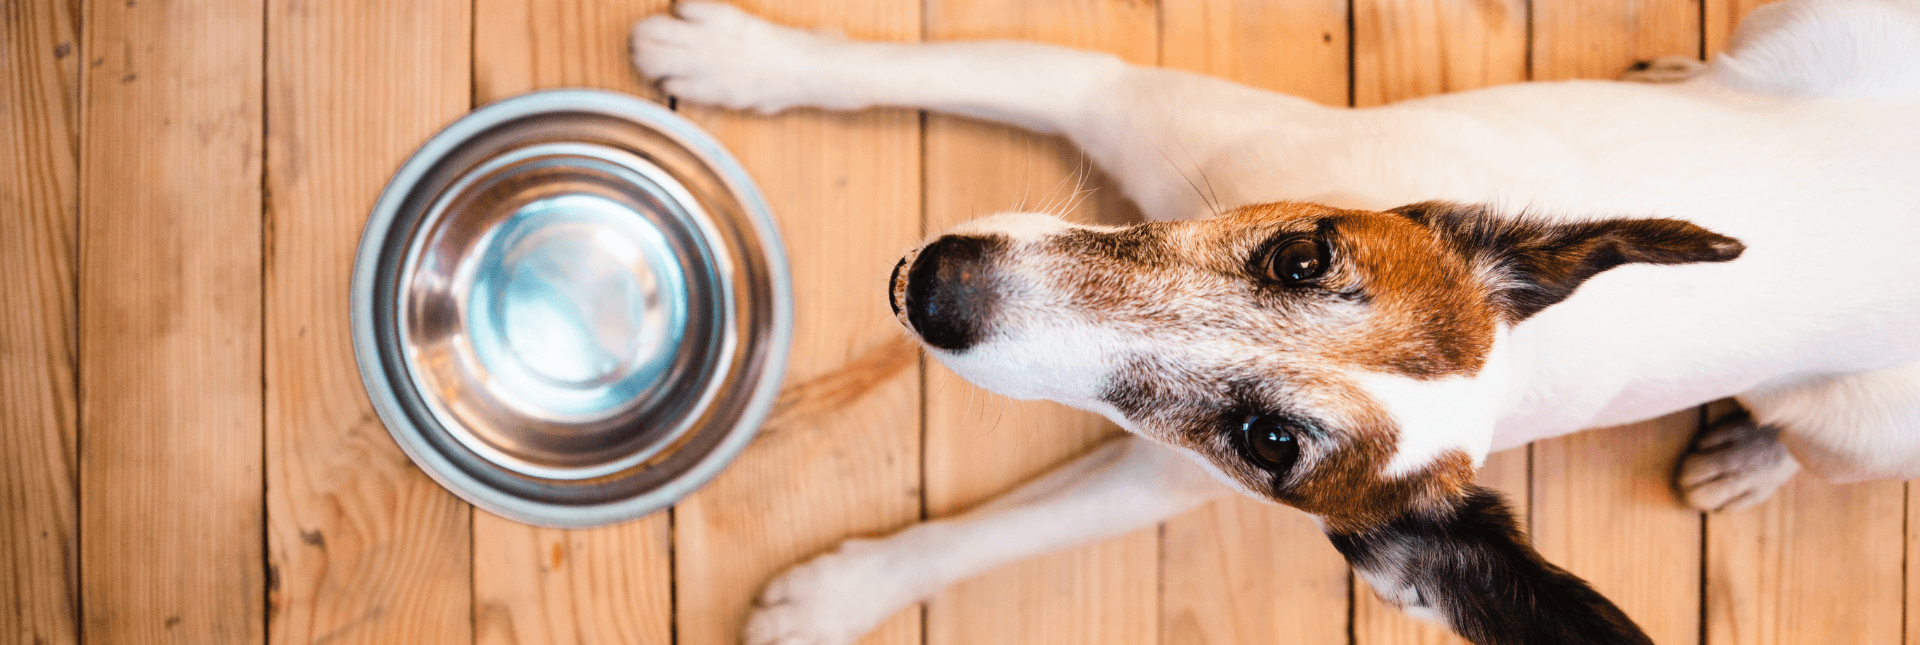 dog waiting for food in empty bowl